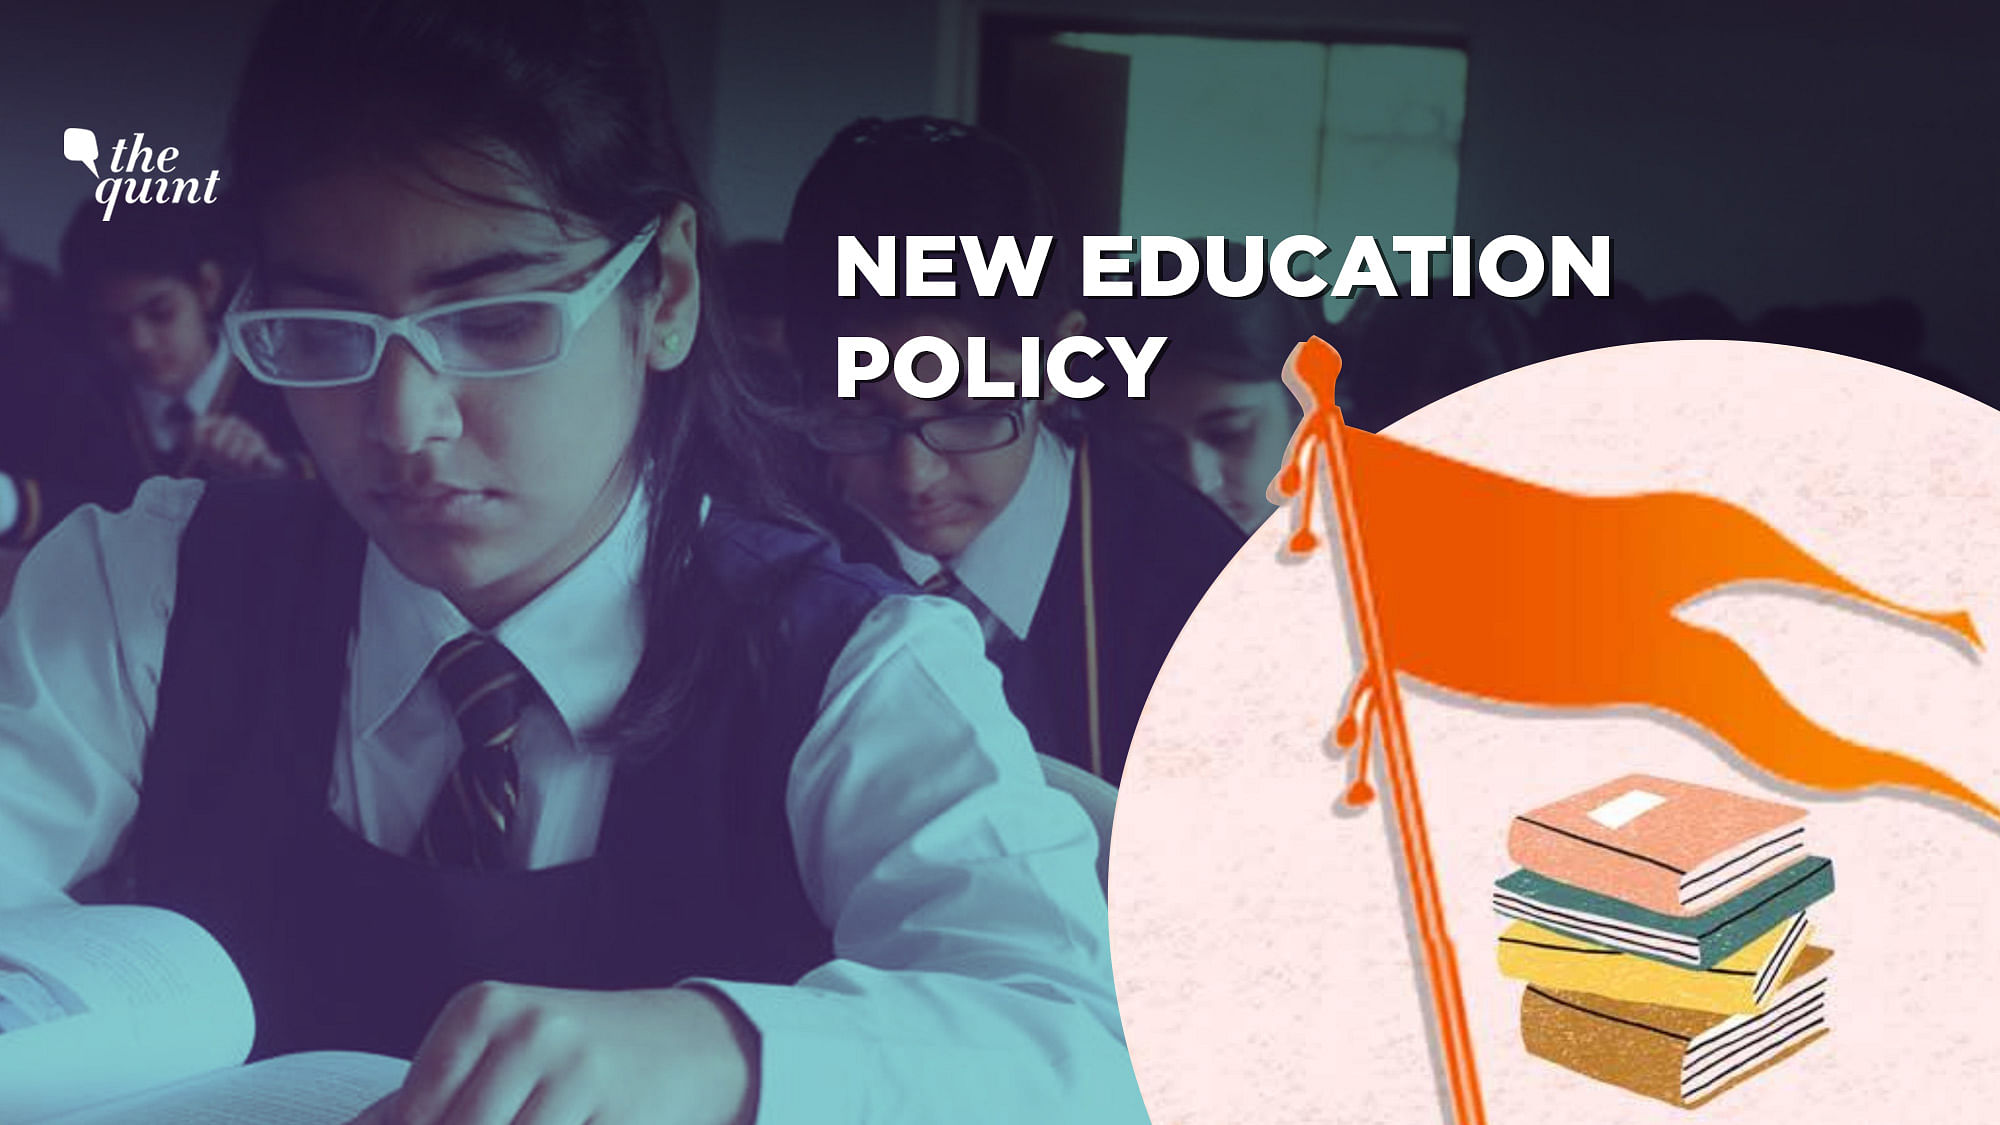 How much influence did the RSS, the BJP’s ideological fountainhead, have on the New Education Policy 2020?